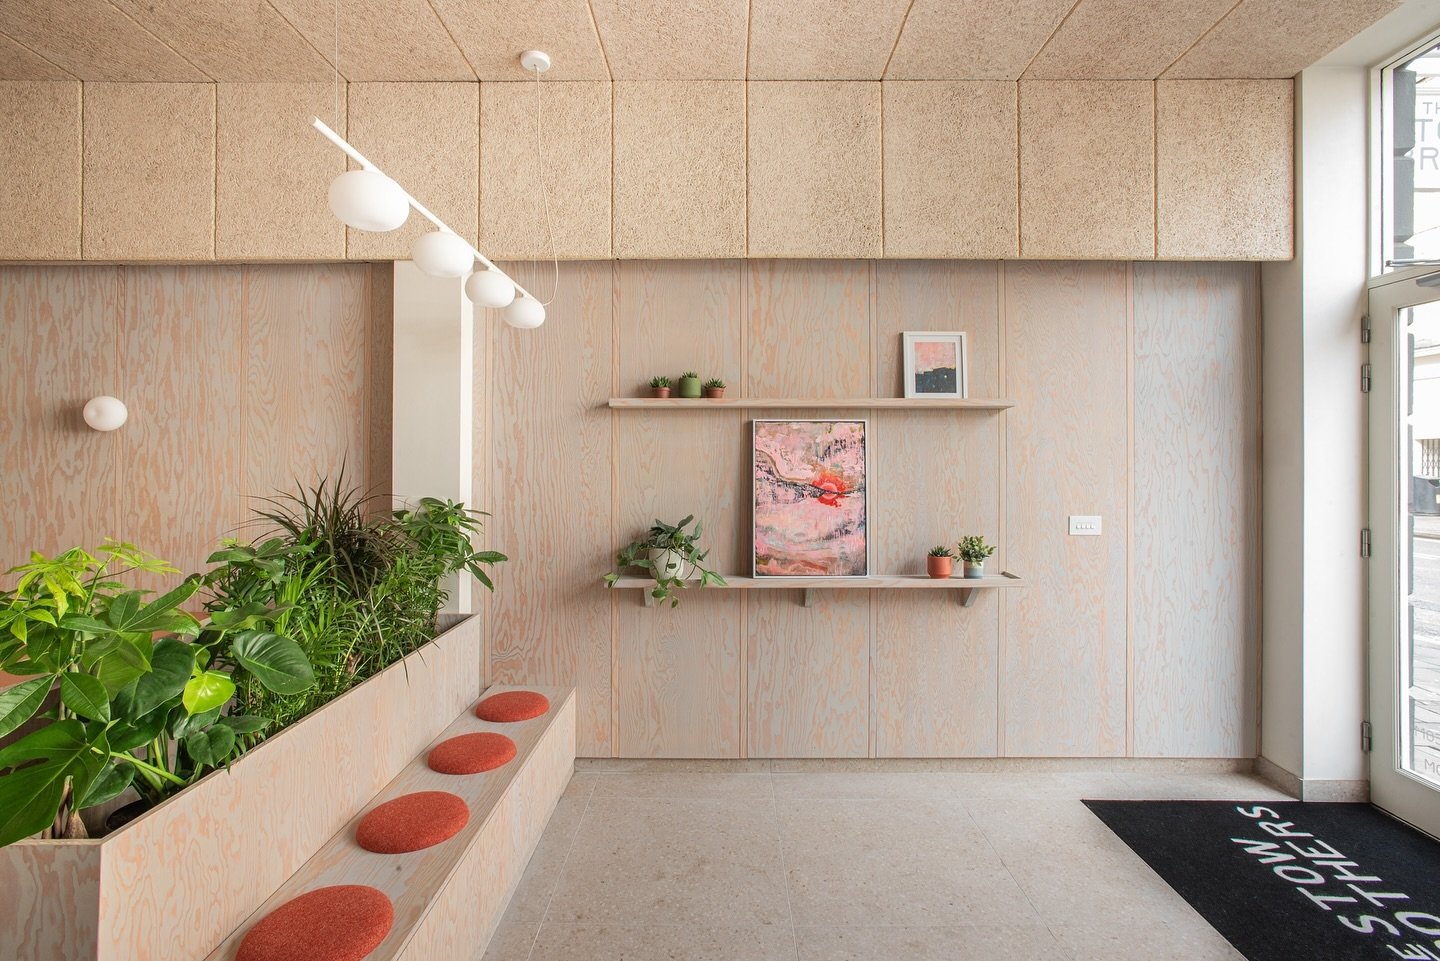 STOW BROTHERS HACKNEY OFFICE DESIGN. The @stowbrothers estate agents love to support and take inspiration from the communities they work in. 
So, we commissioned @gavincoylestudio, a talented local craftsman to bring my joinery designs to life and so